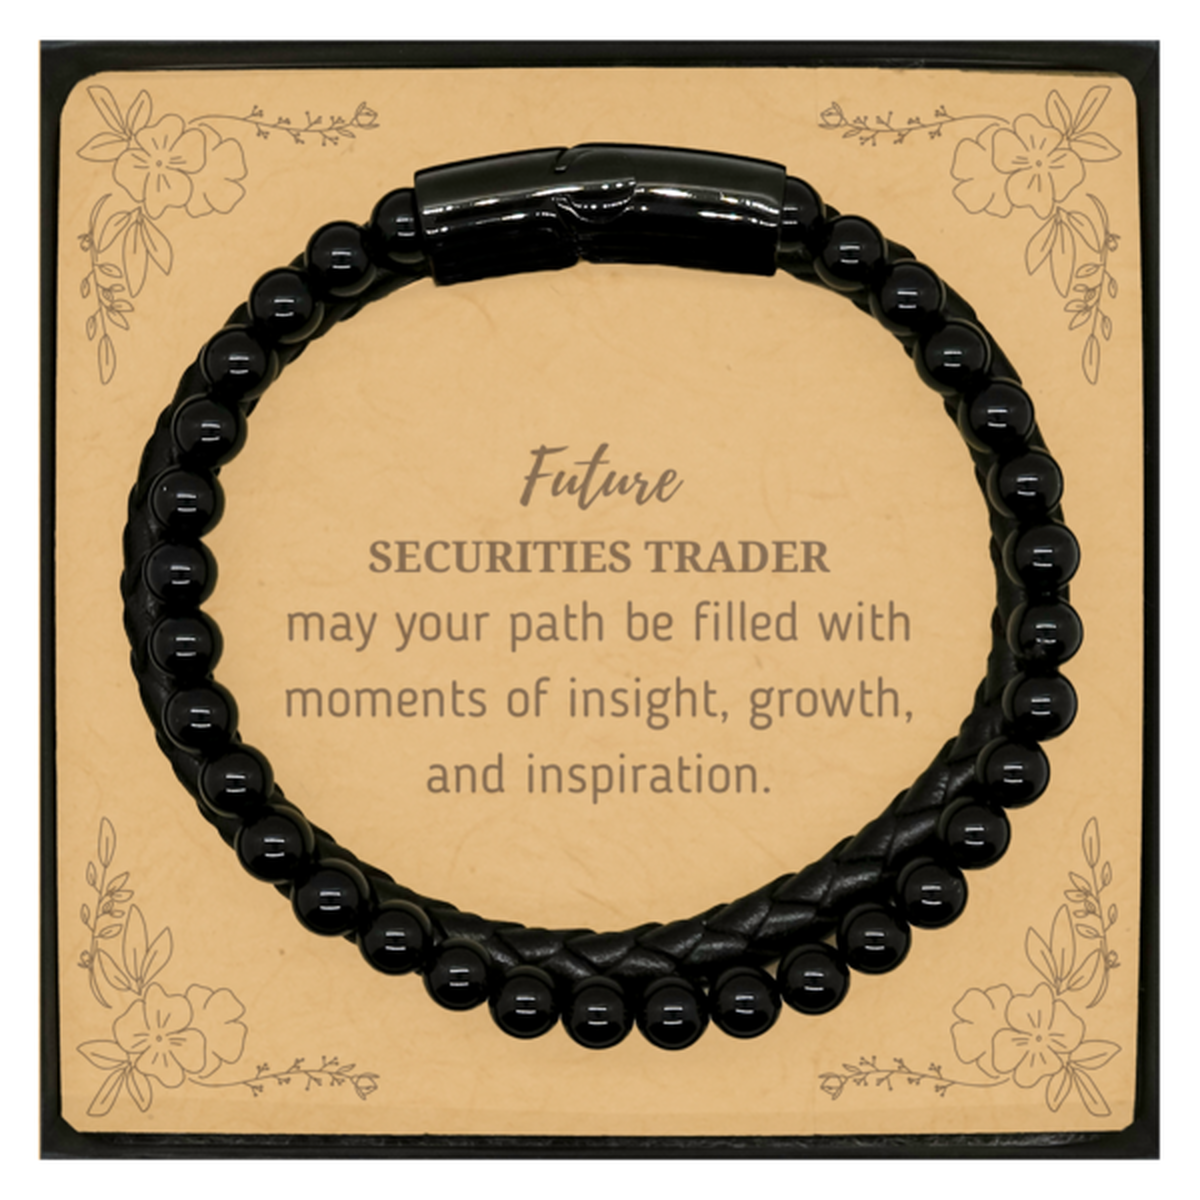 Future Securities Trader Gifts, May your path be filled with moments of insight, Graduation Gifts for New Securities Trader, Christmas Unique Stone Leather Bracelets For Men, Women, Friends